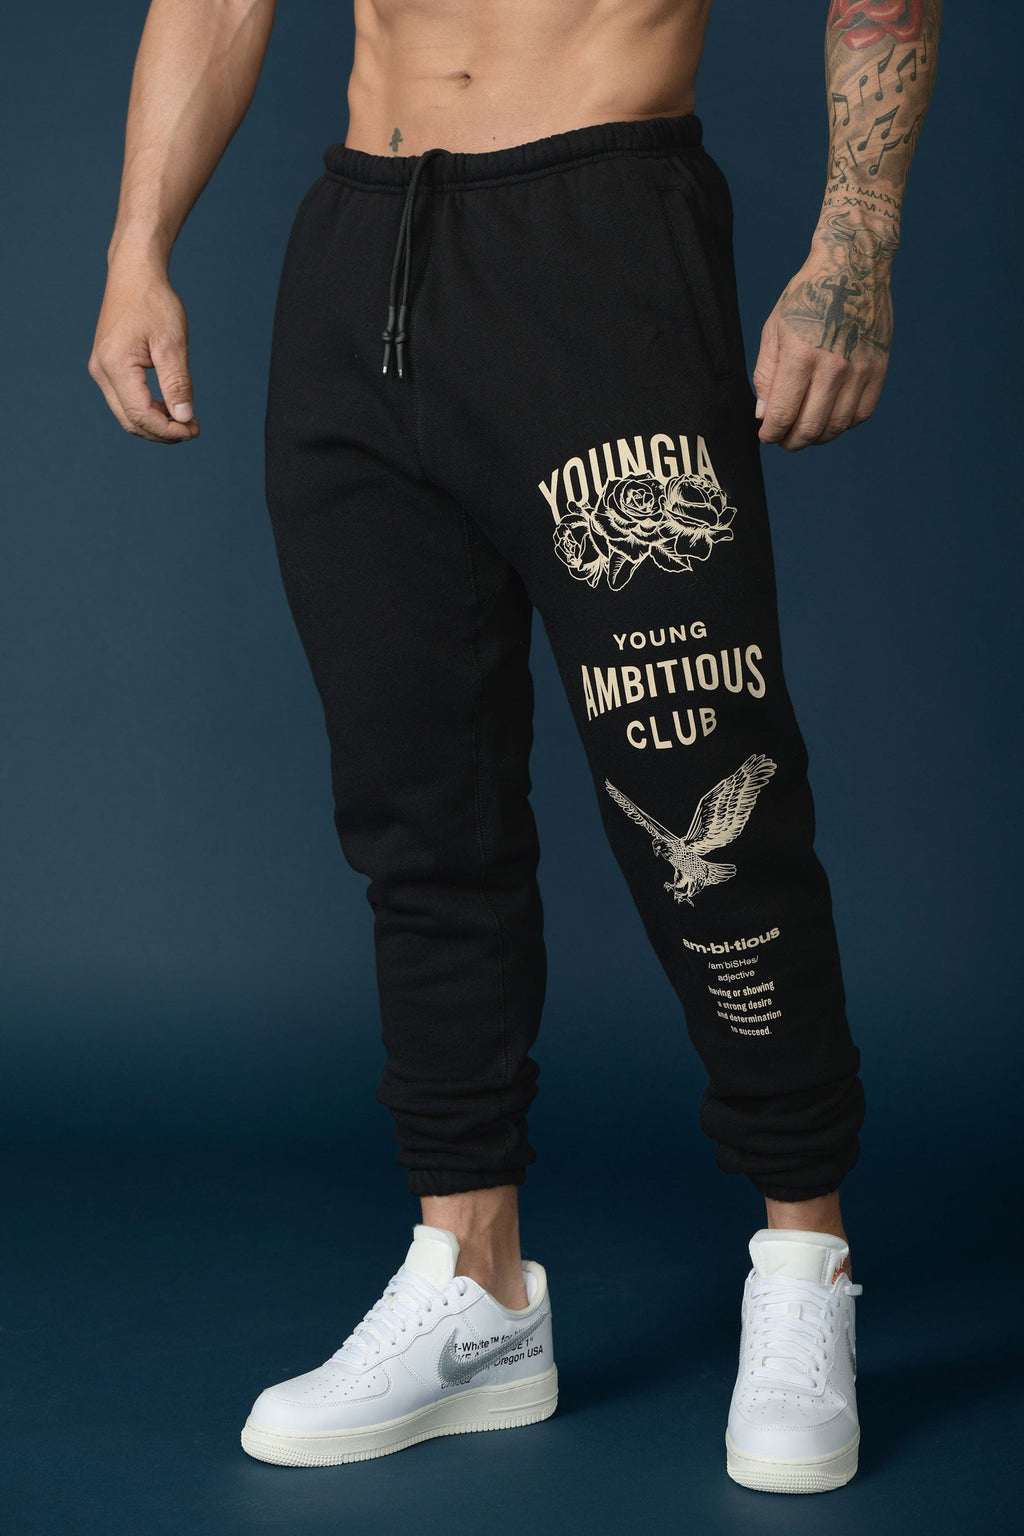 Young Ambitious Club Printed Men's Sweatpants